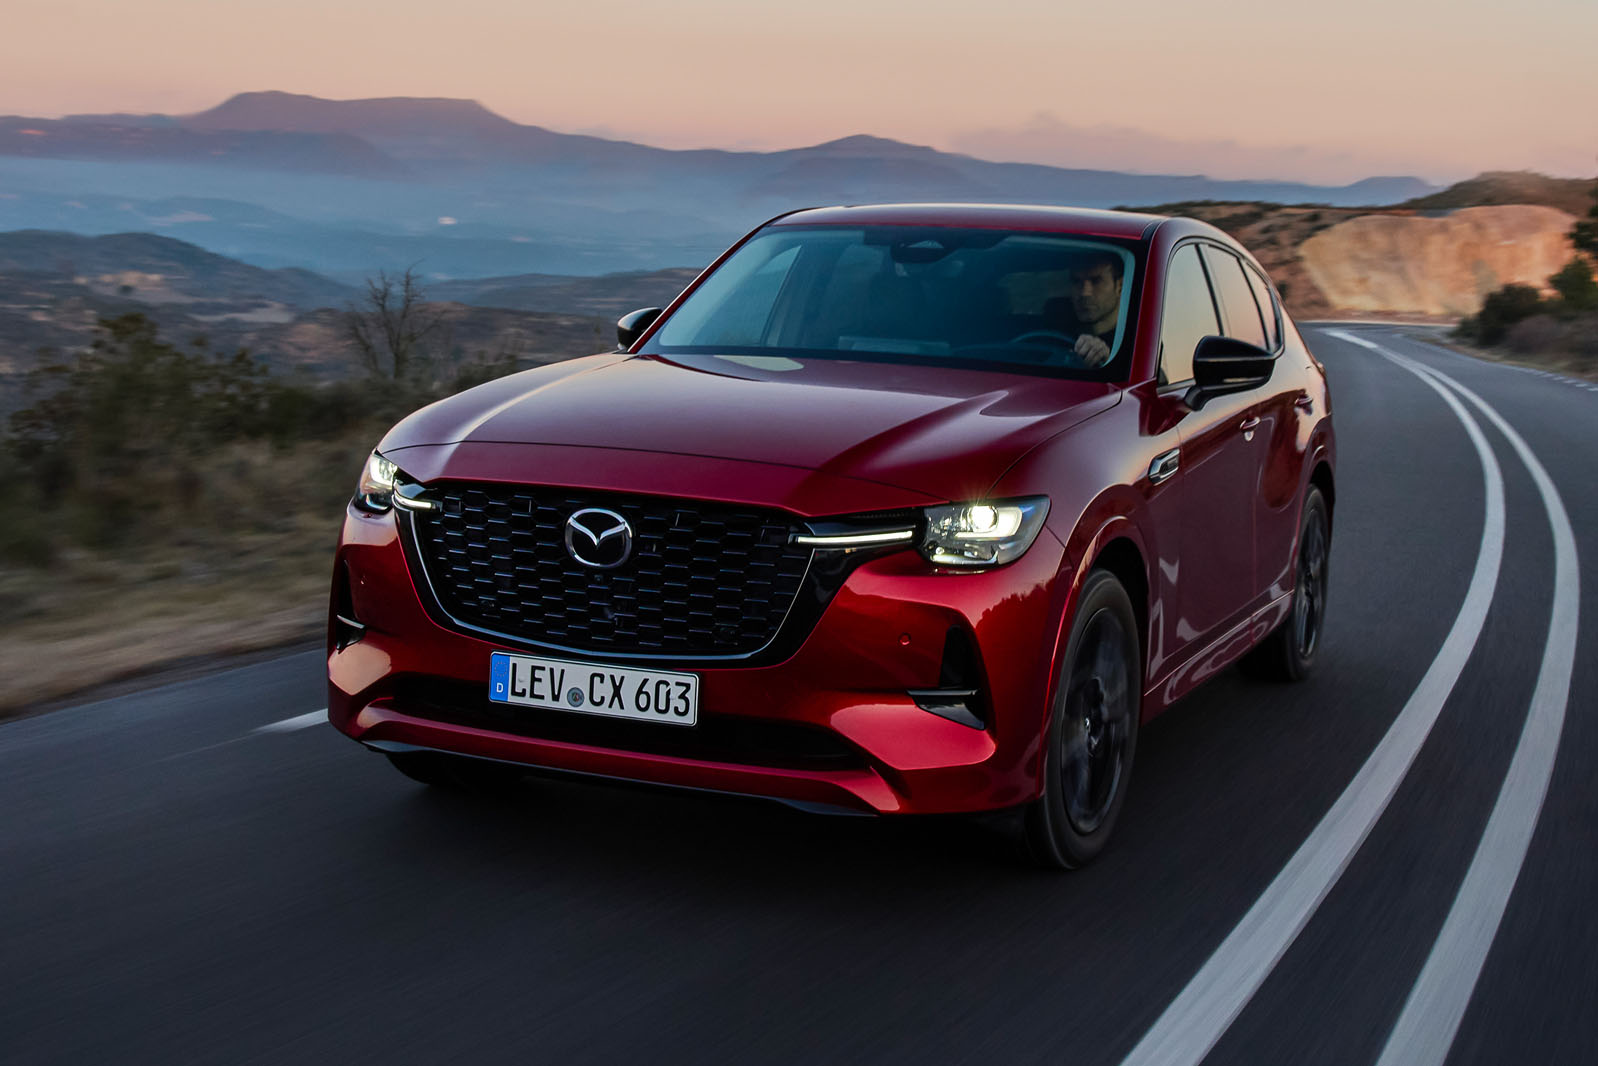 https://www.autocar.co.uk/sites/autocar.co.uk/files/images/car-reviews/first-drives/legacy/mazda_cx-60_diesel_front_34_driving_hero.jpg